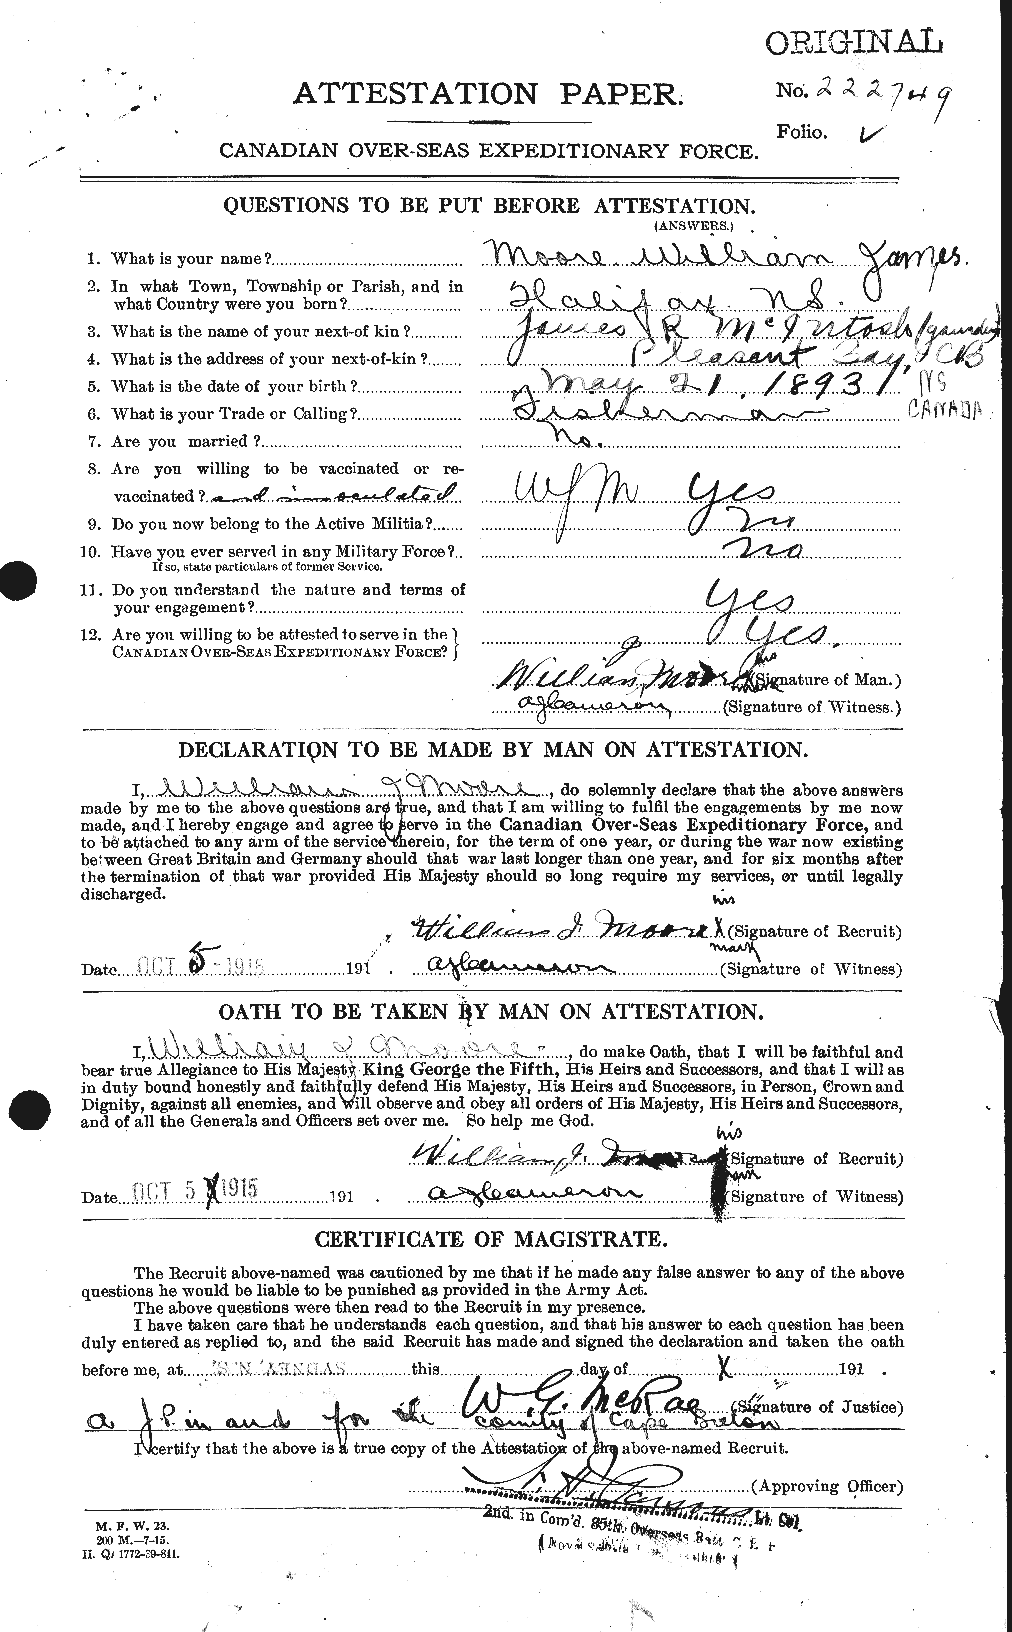 Personnel Records of the First World War - CEF 505834a